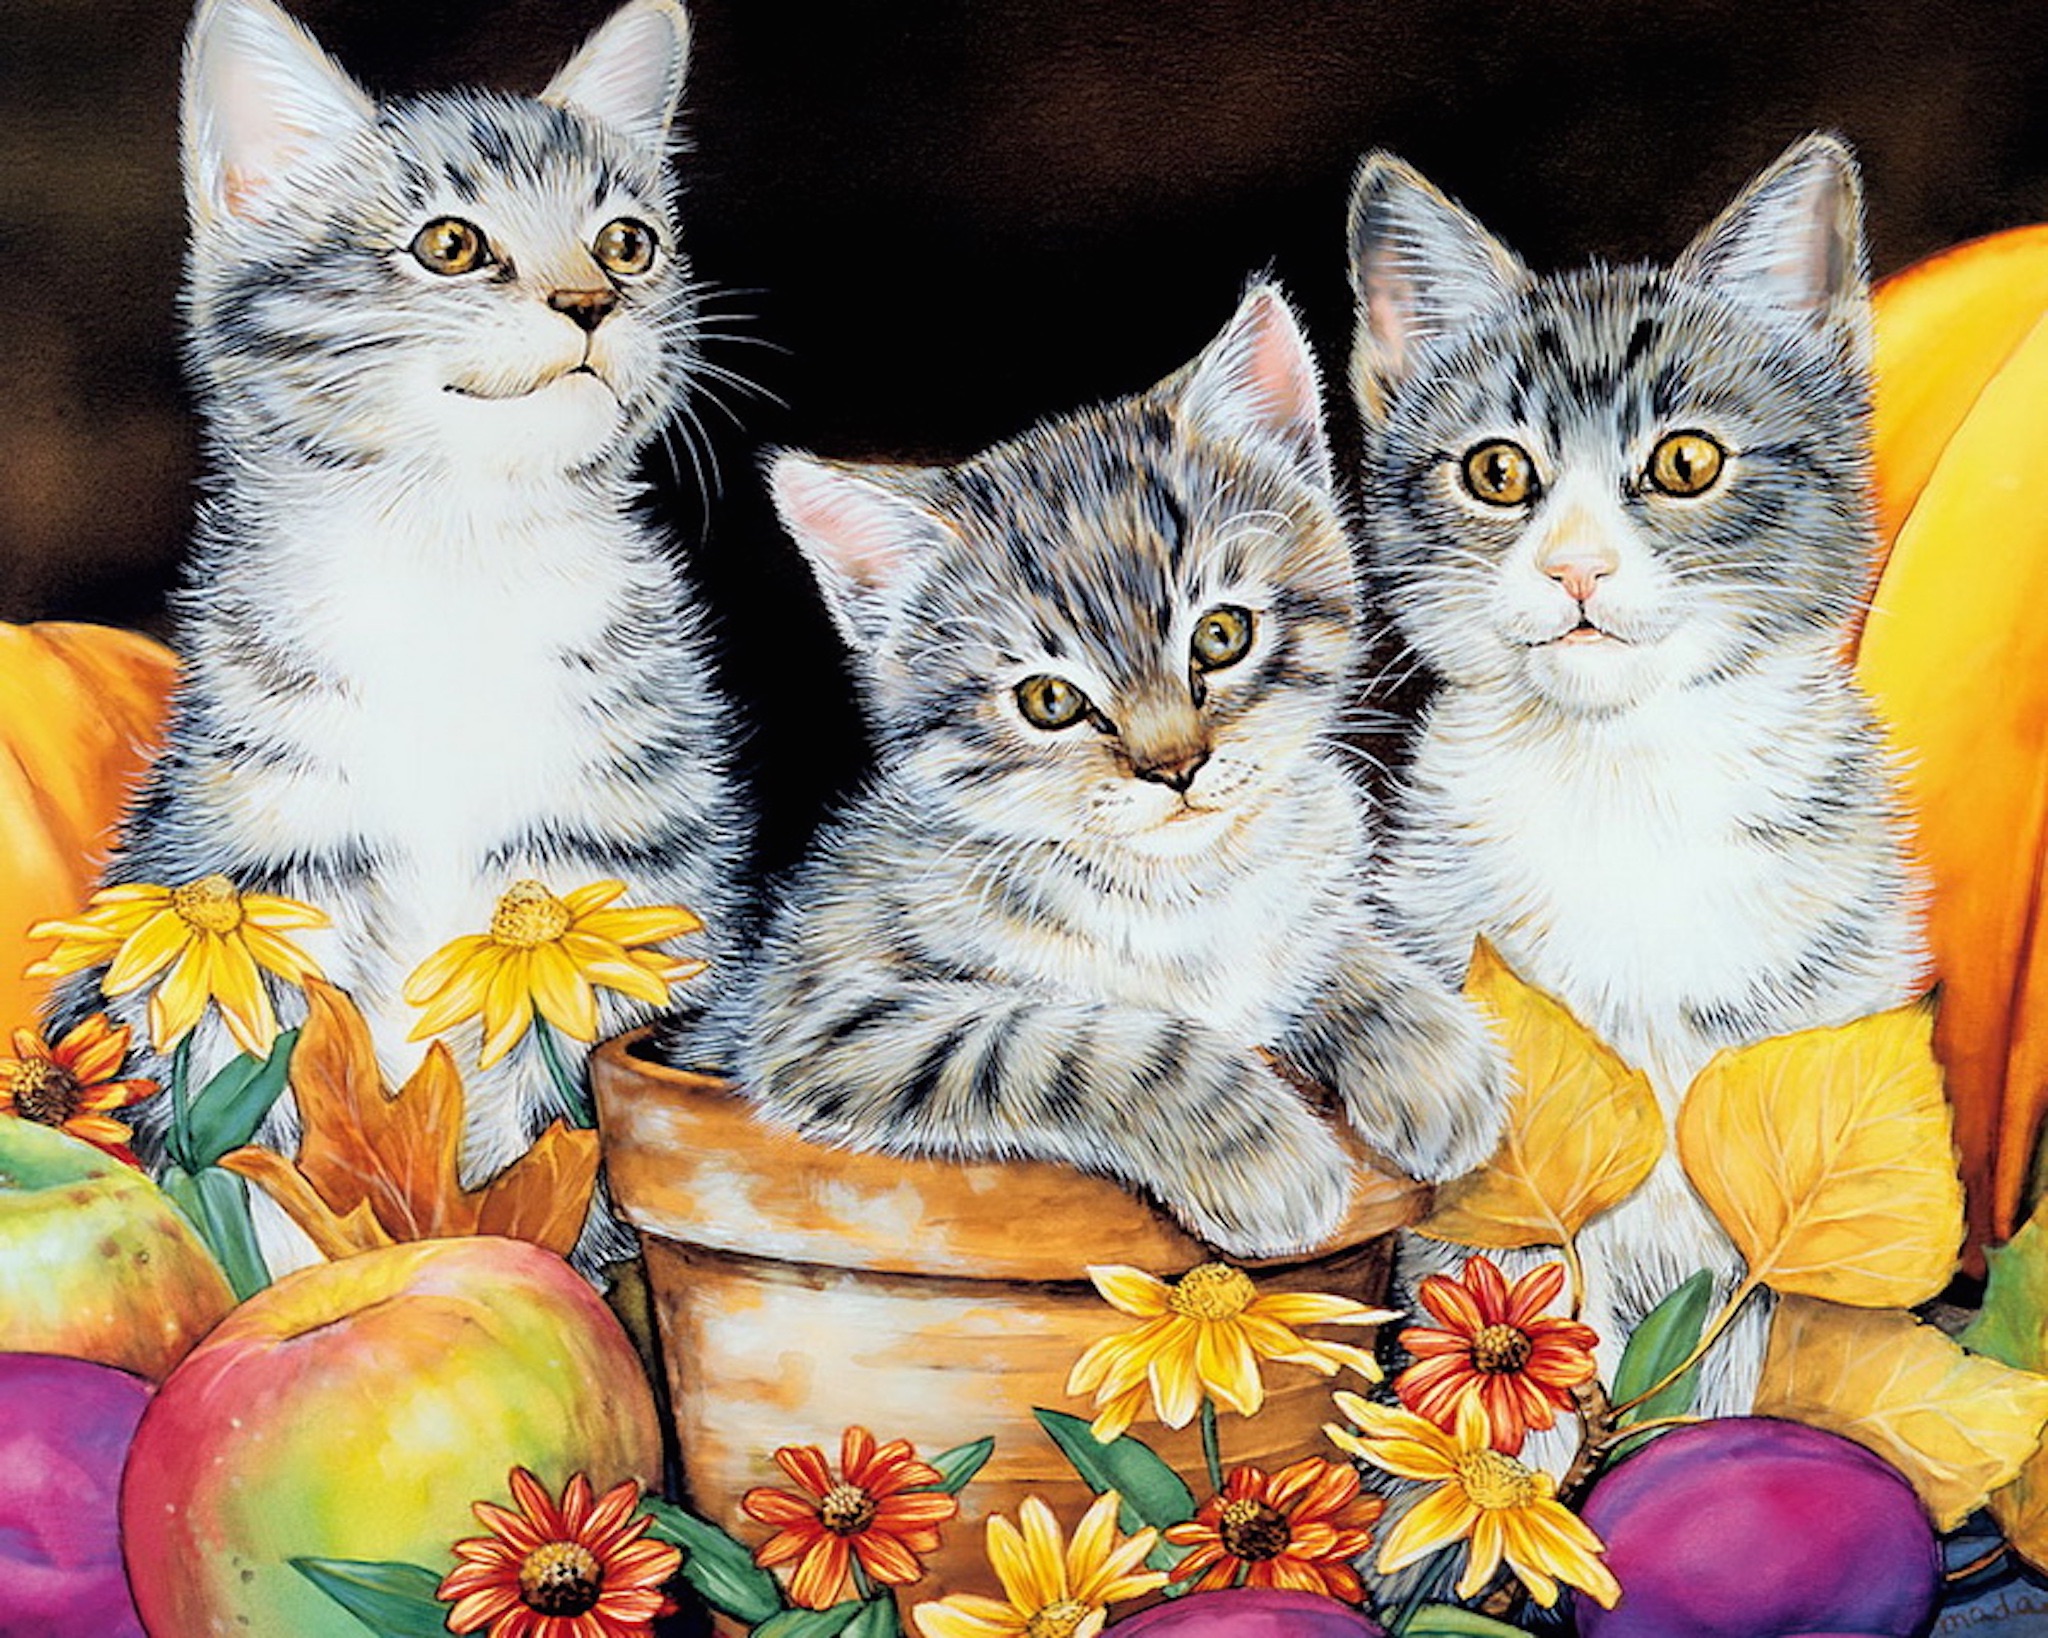 Autumn Kittens Painting Wallpaper Free Cat Images